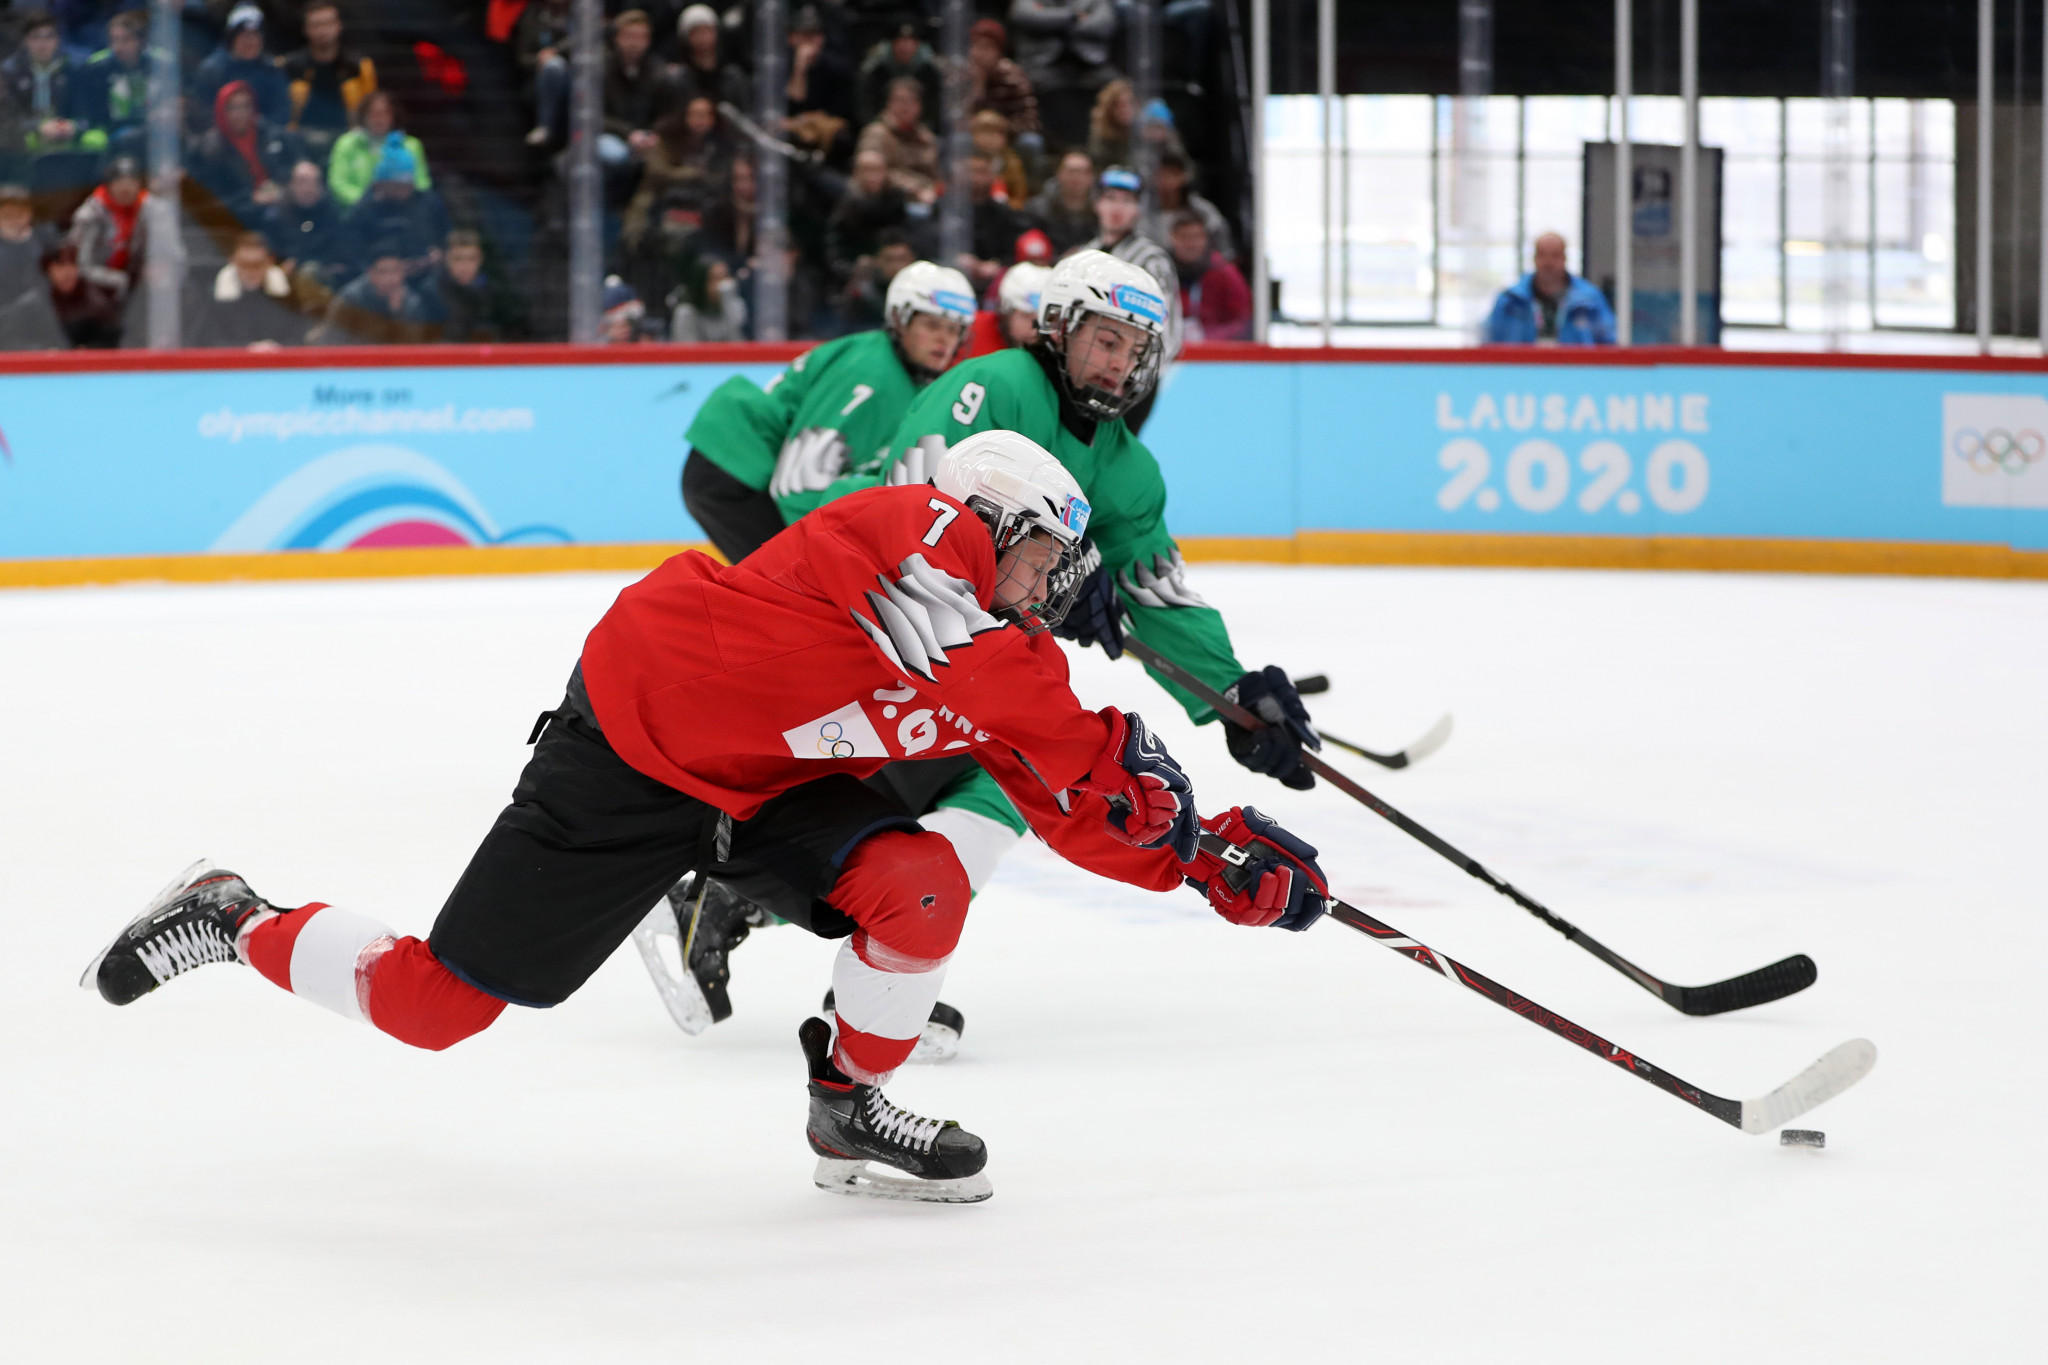 Three-on-three ice hockey featured at the Lausanne 2020 Youth Olympic Games ©Getty Images